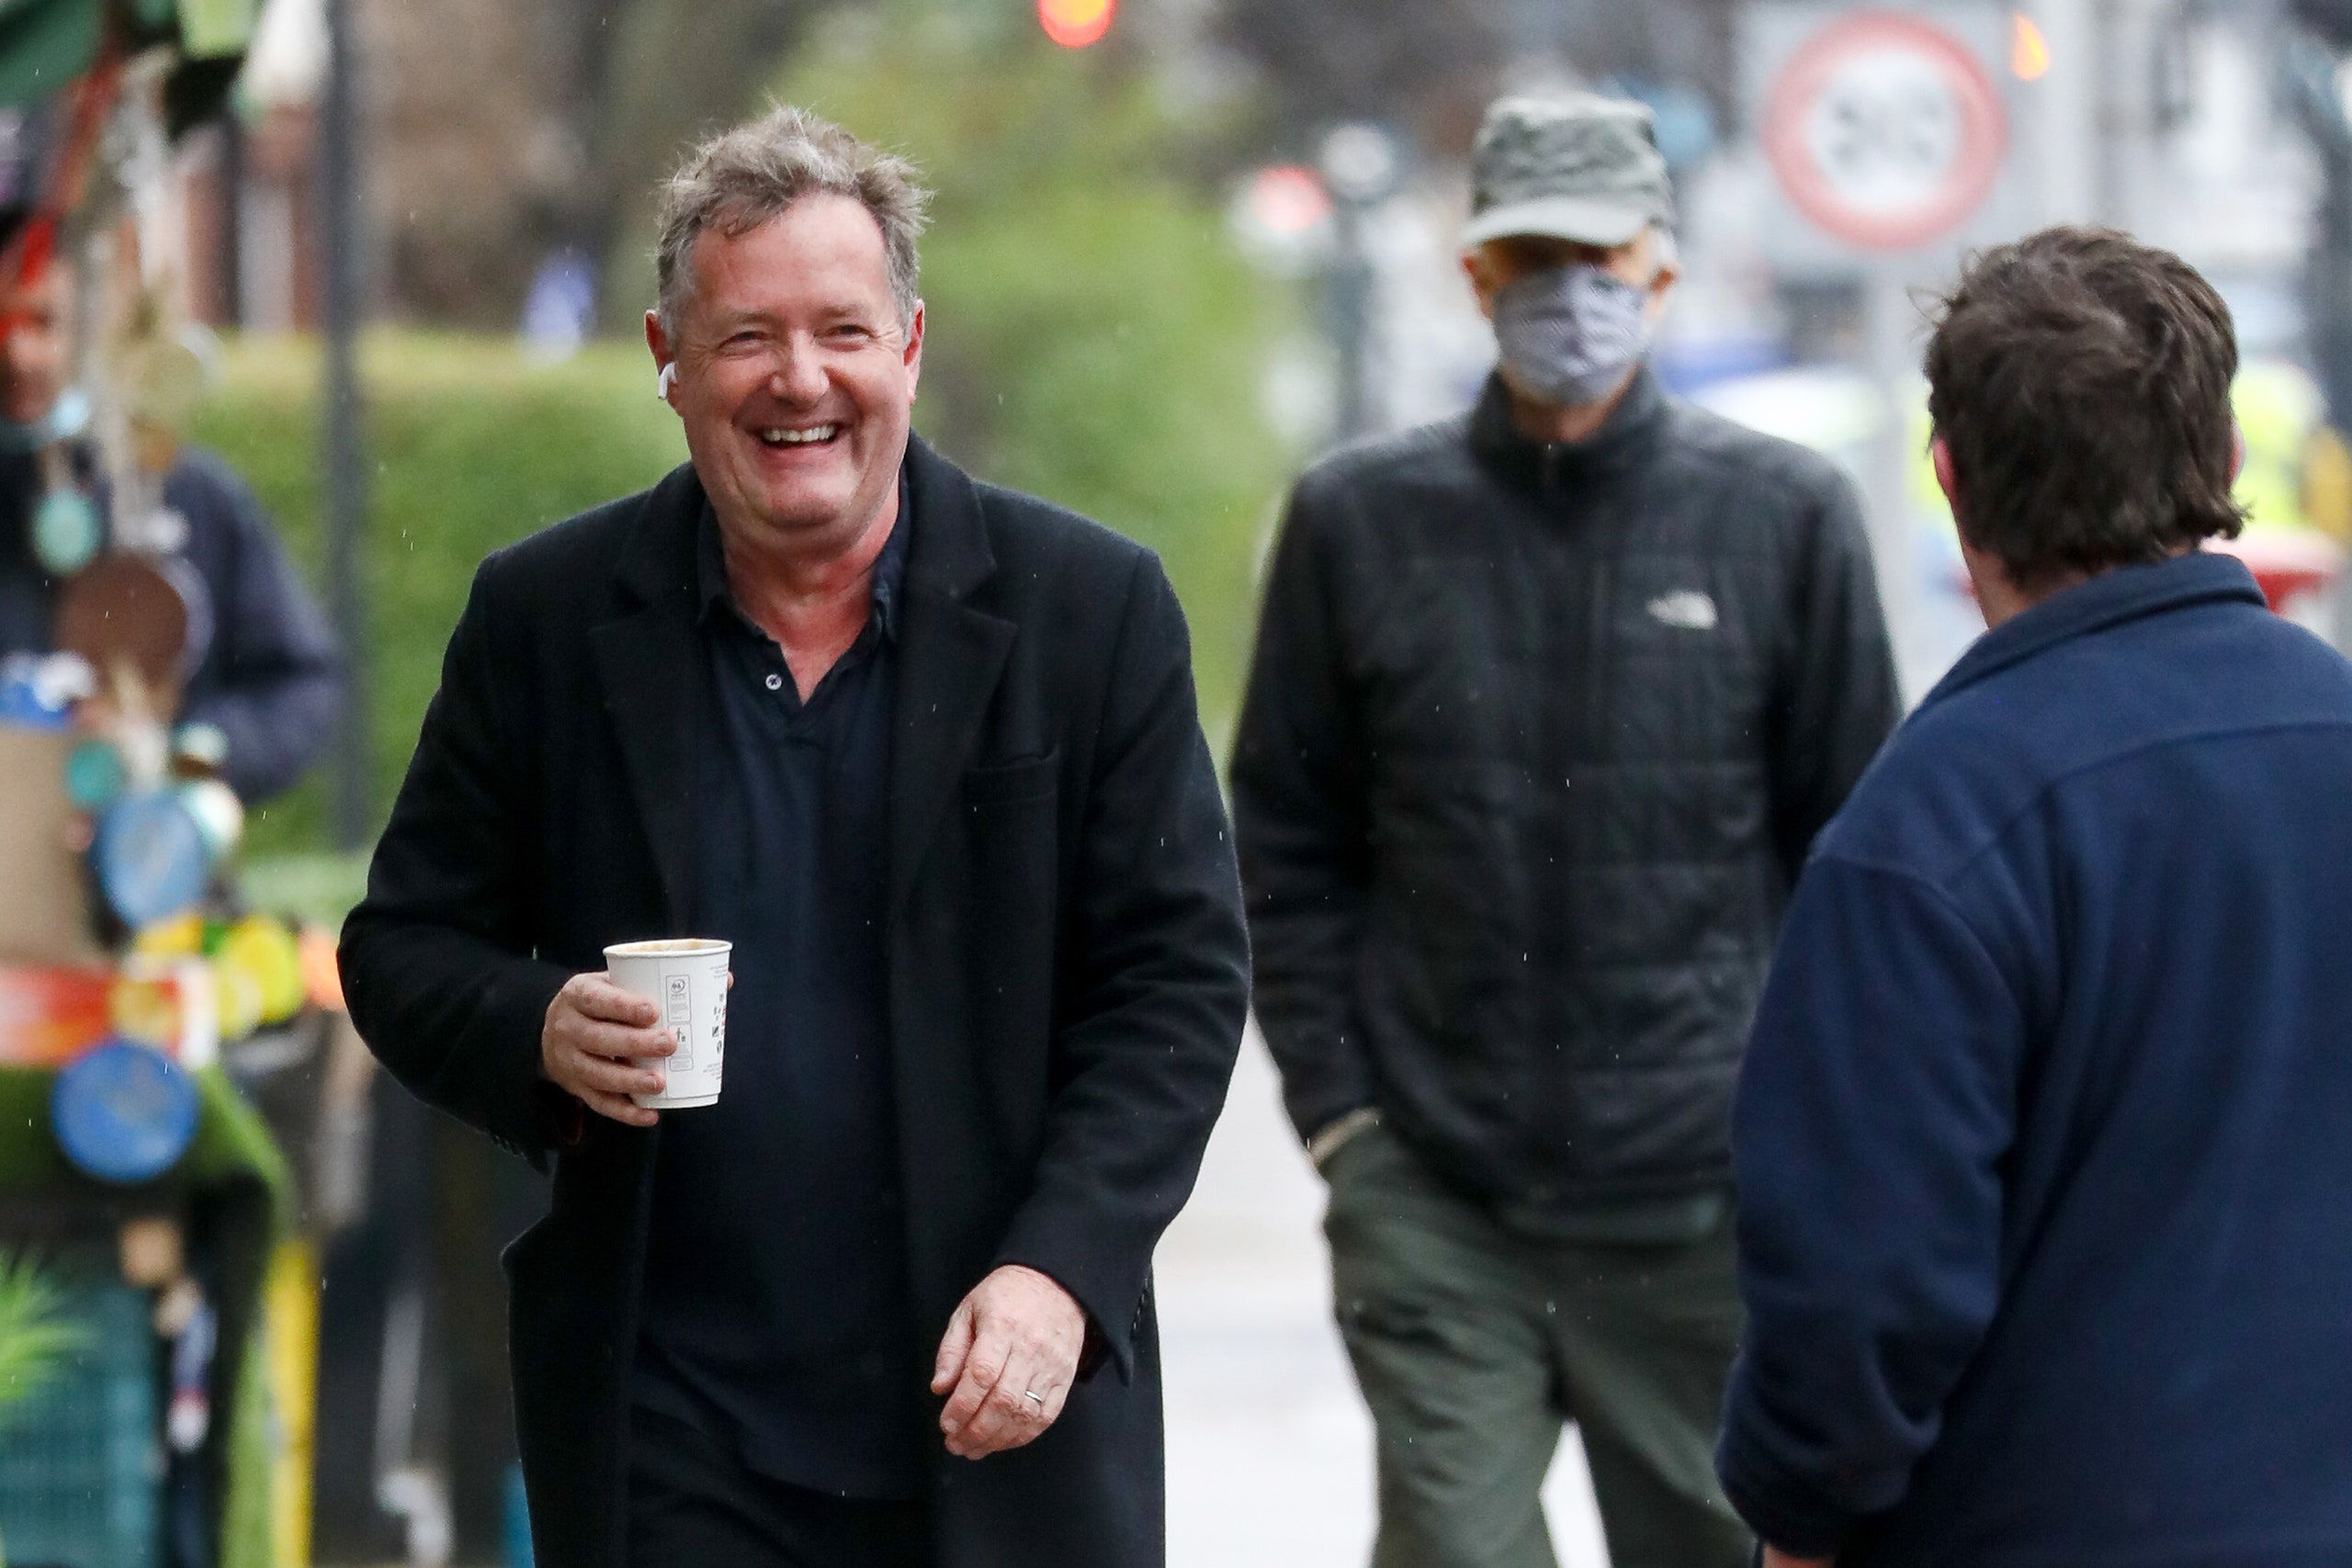 Piers Morgan to Announce His New Job as a Star hoping to Travel Intergalactic!